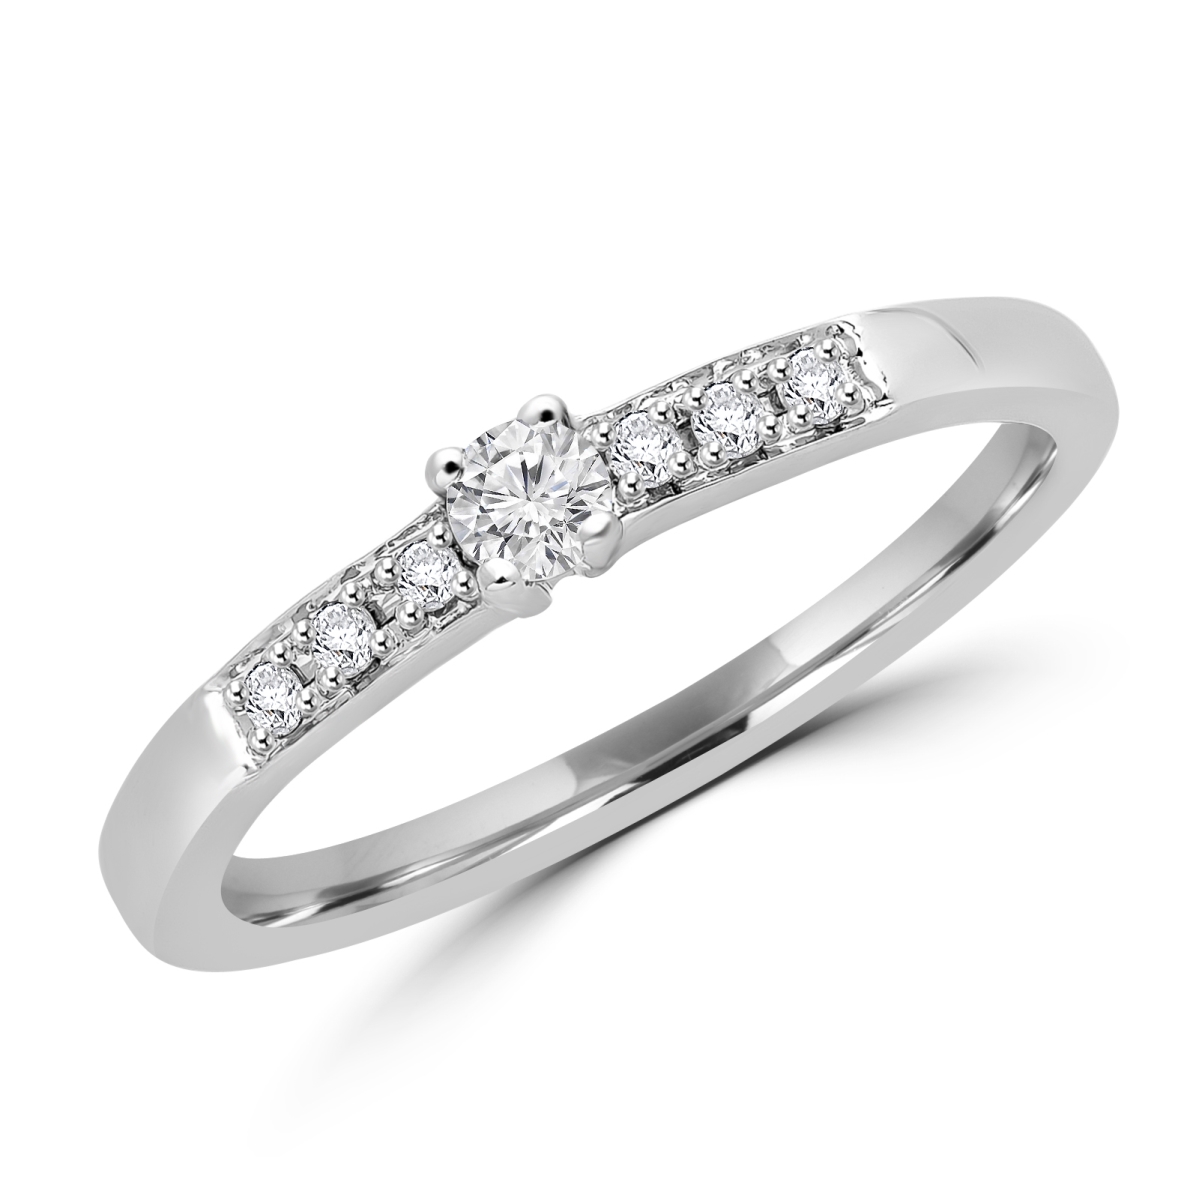 Picture of Majesty Diamonds MDR130018 0.14 CTW Round Diamond Solitaire with Accents Engagement Ring in 14K